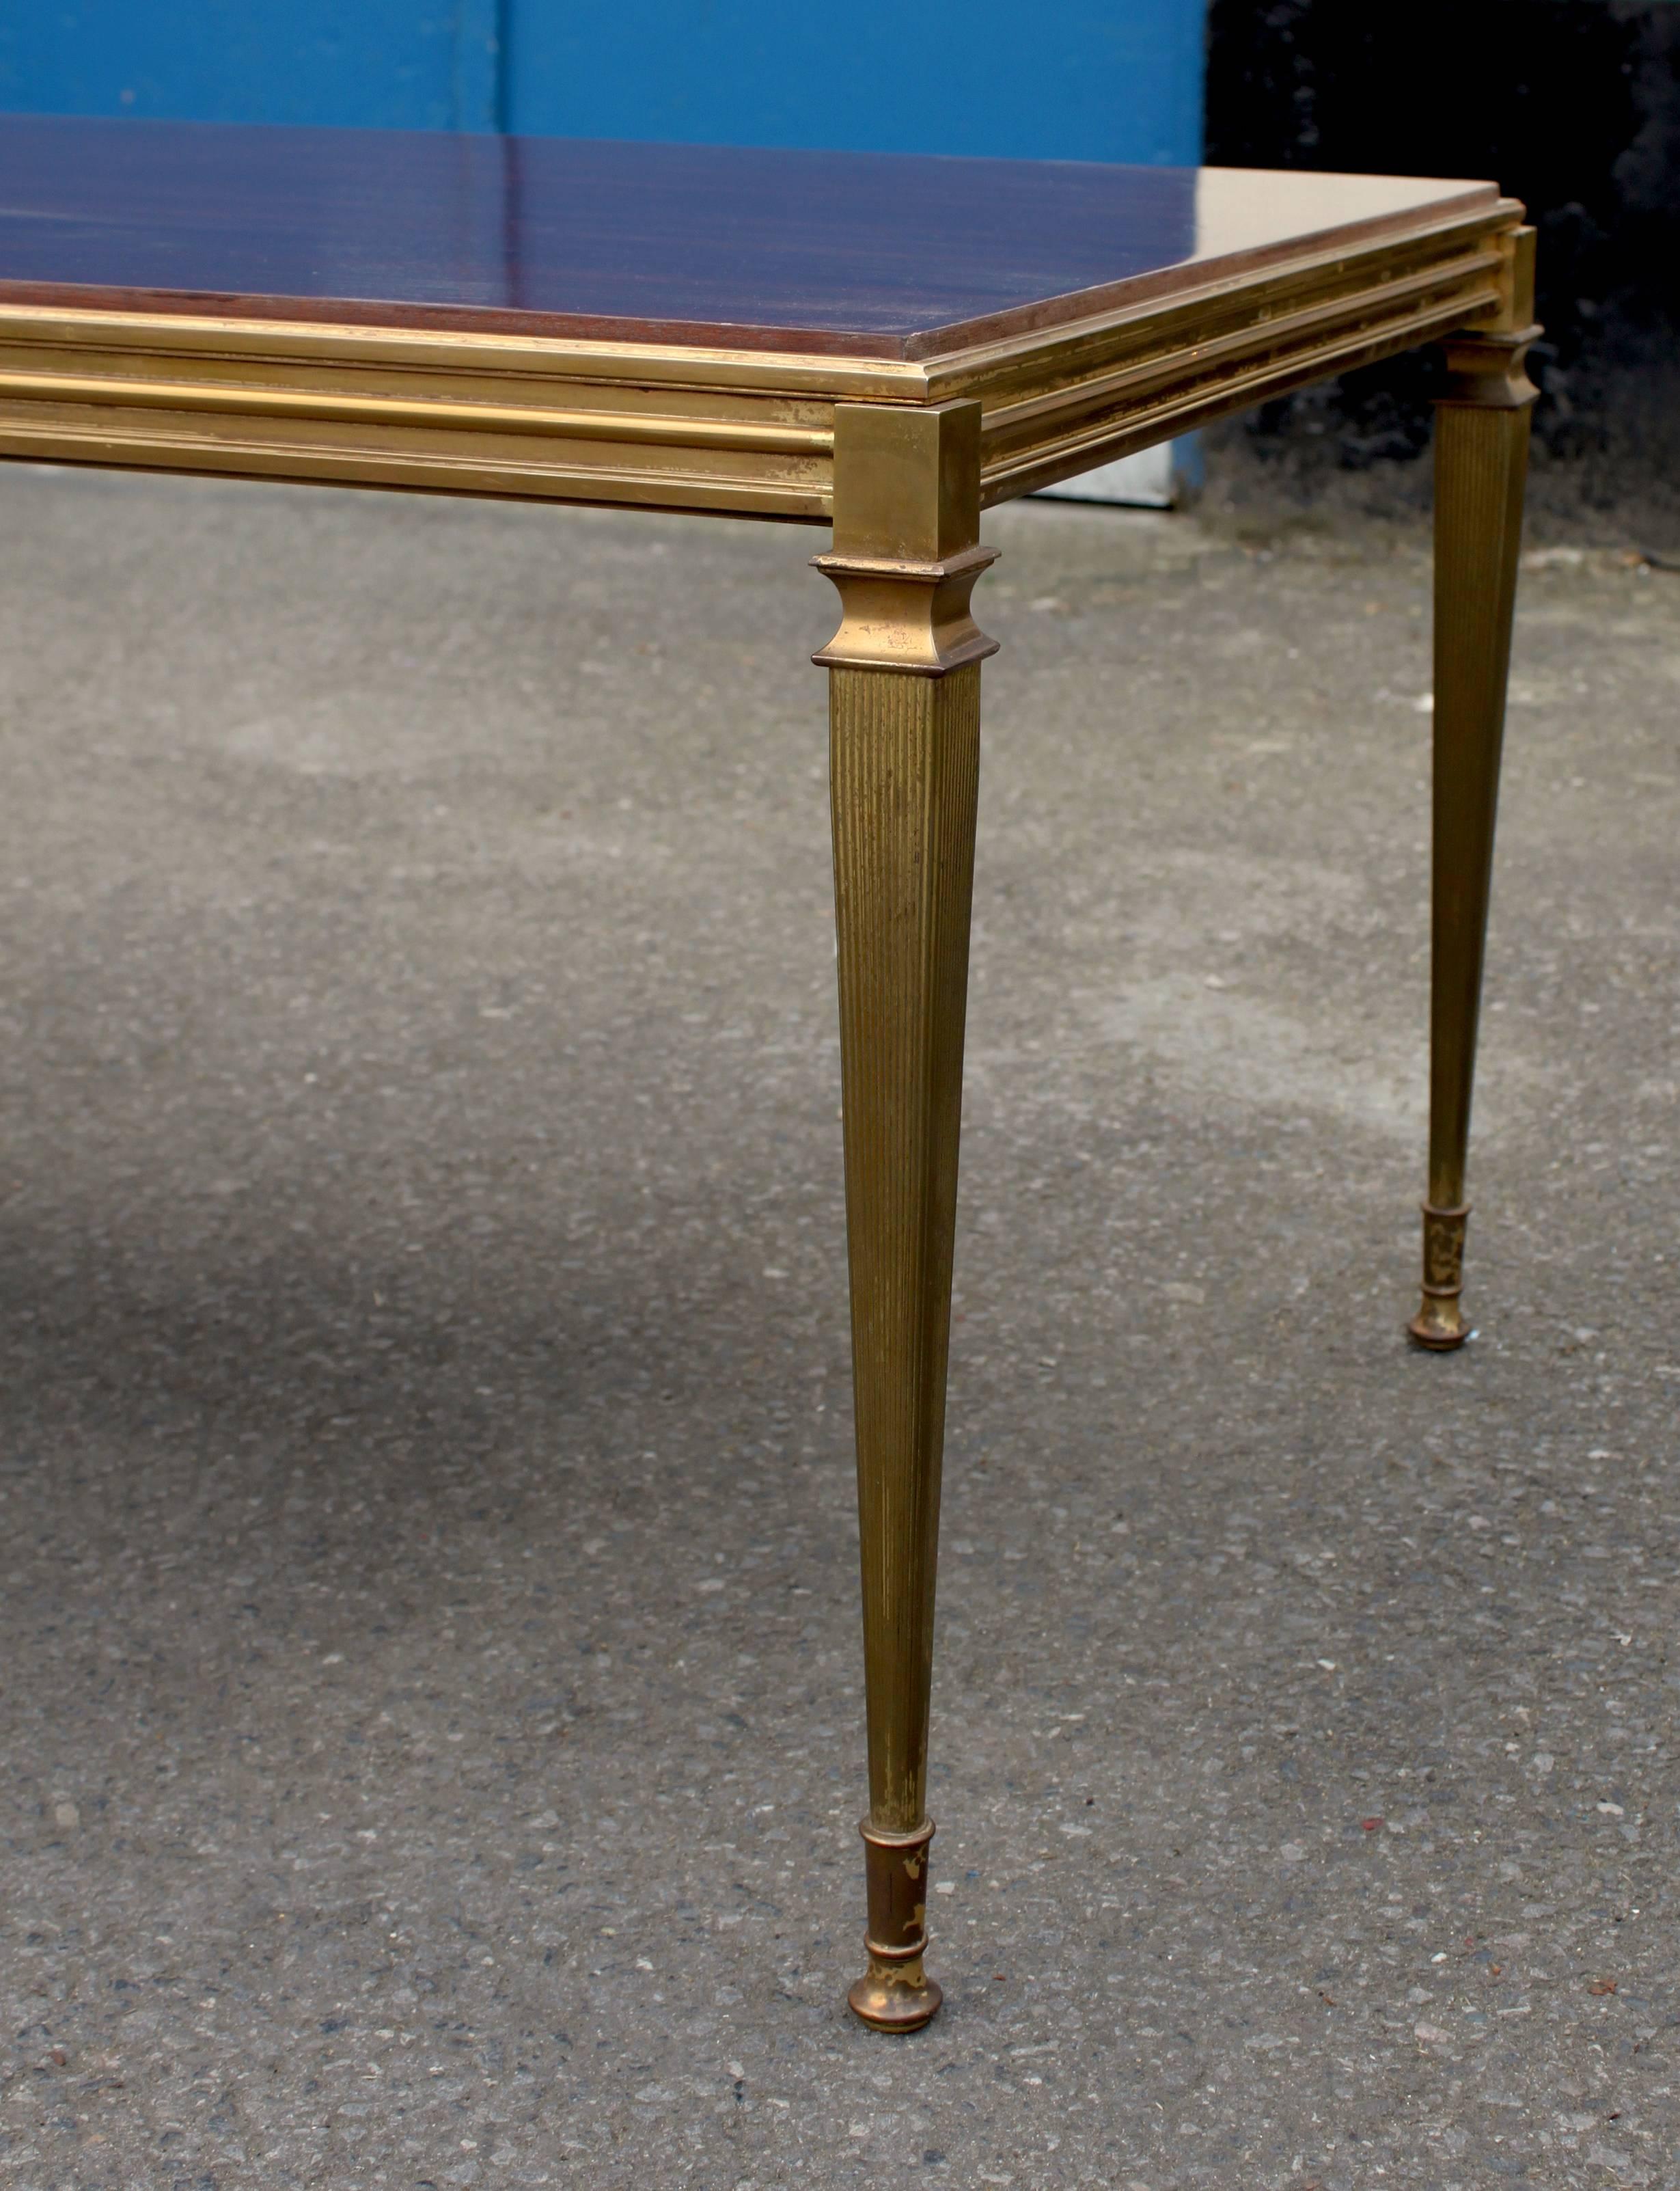 Mid-Century Modern Brass Coffee Table with Walnut Top from 1960s For Sale